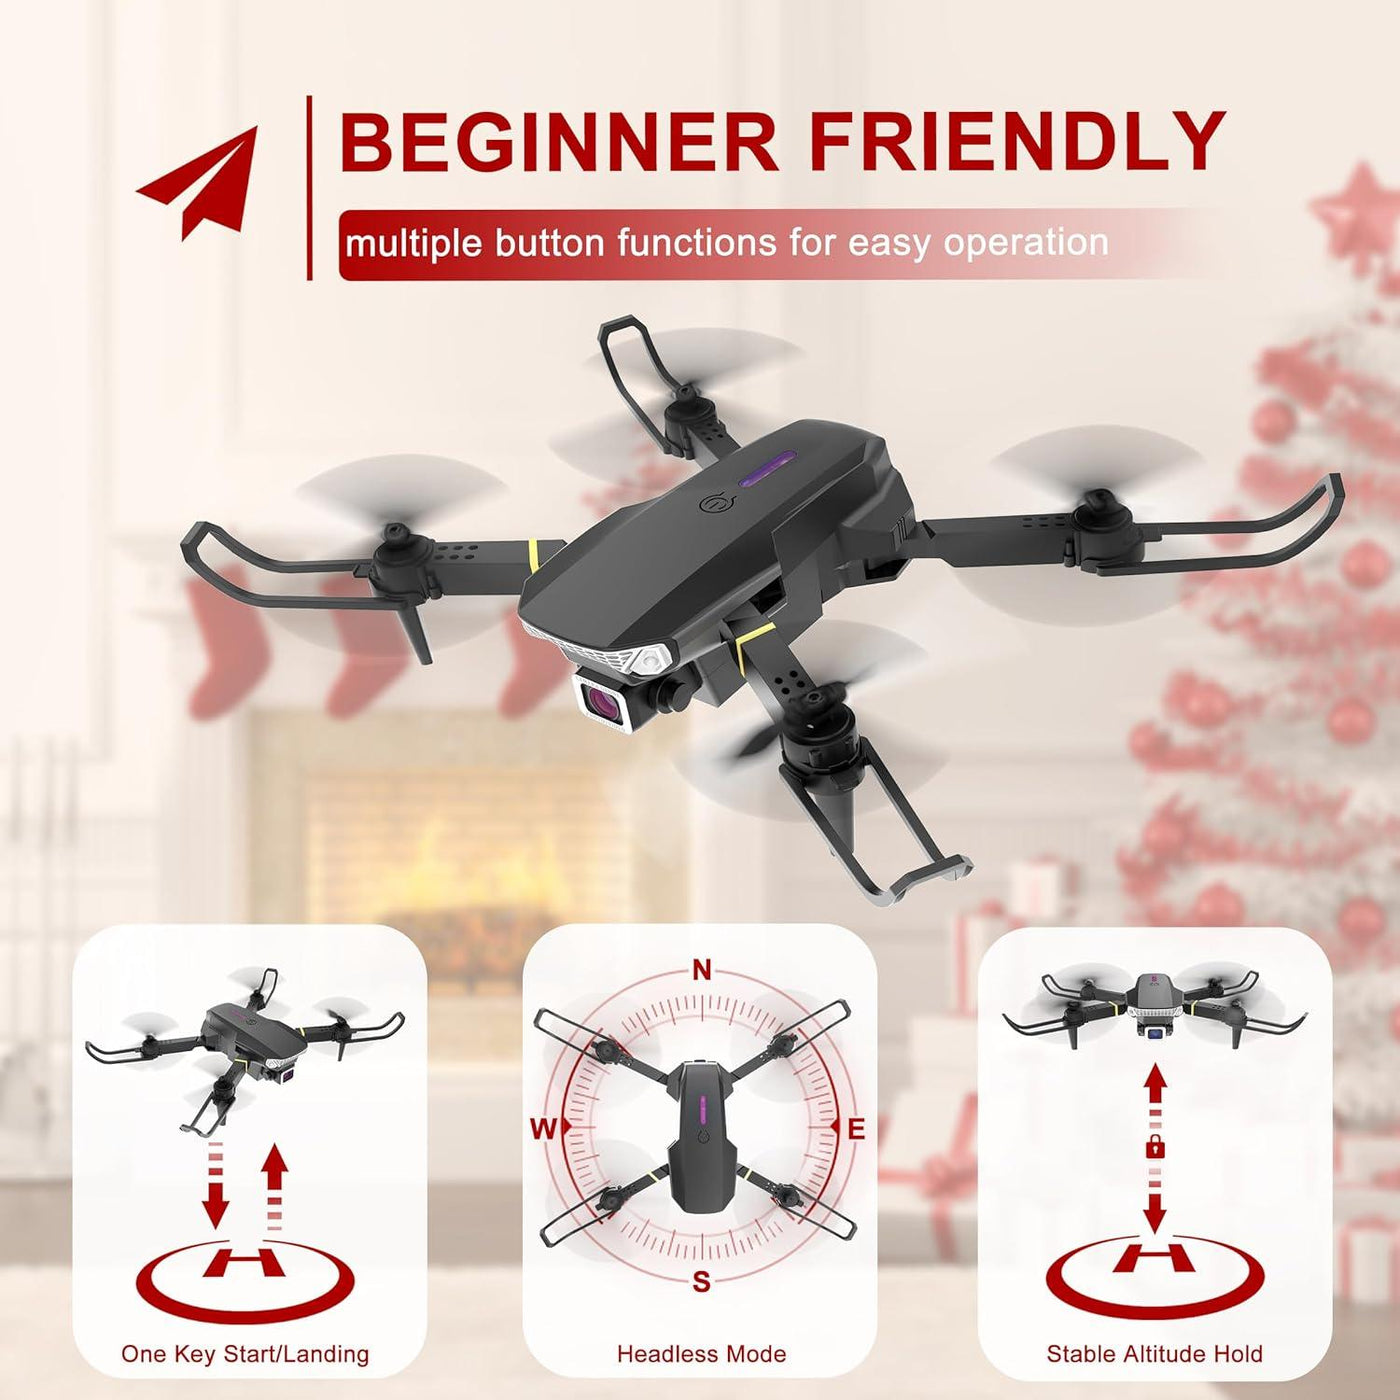 Wipkviey T27 Foldable Drone for Kids/Adults/Beginners with 720P Camera - Massive Discounts